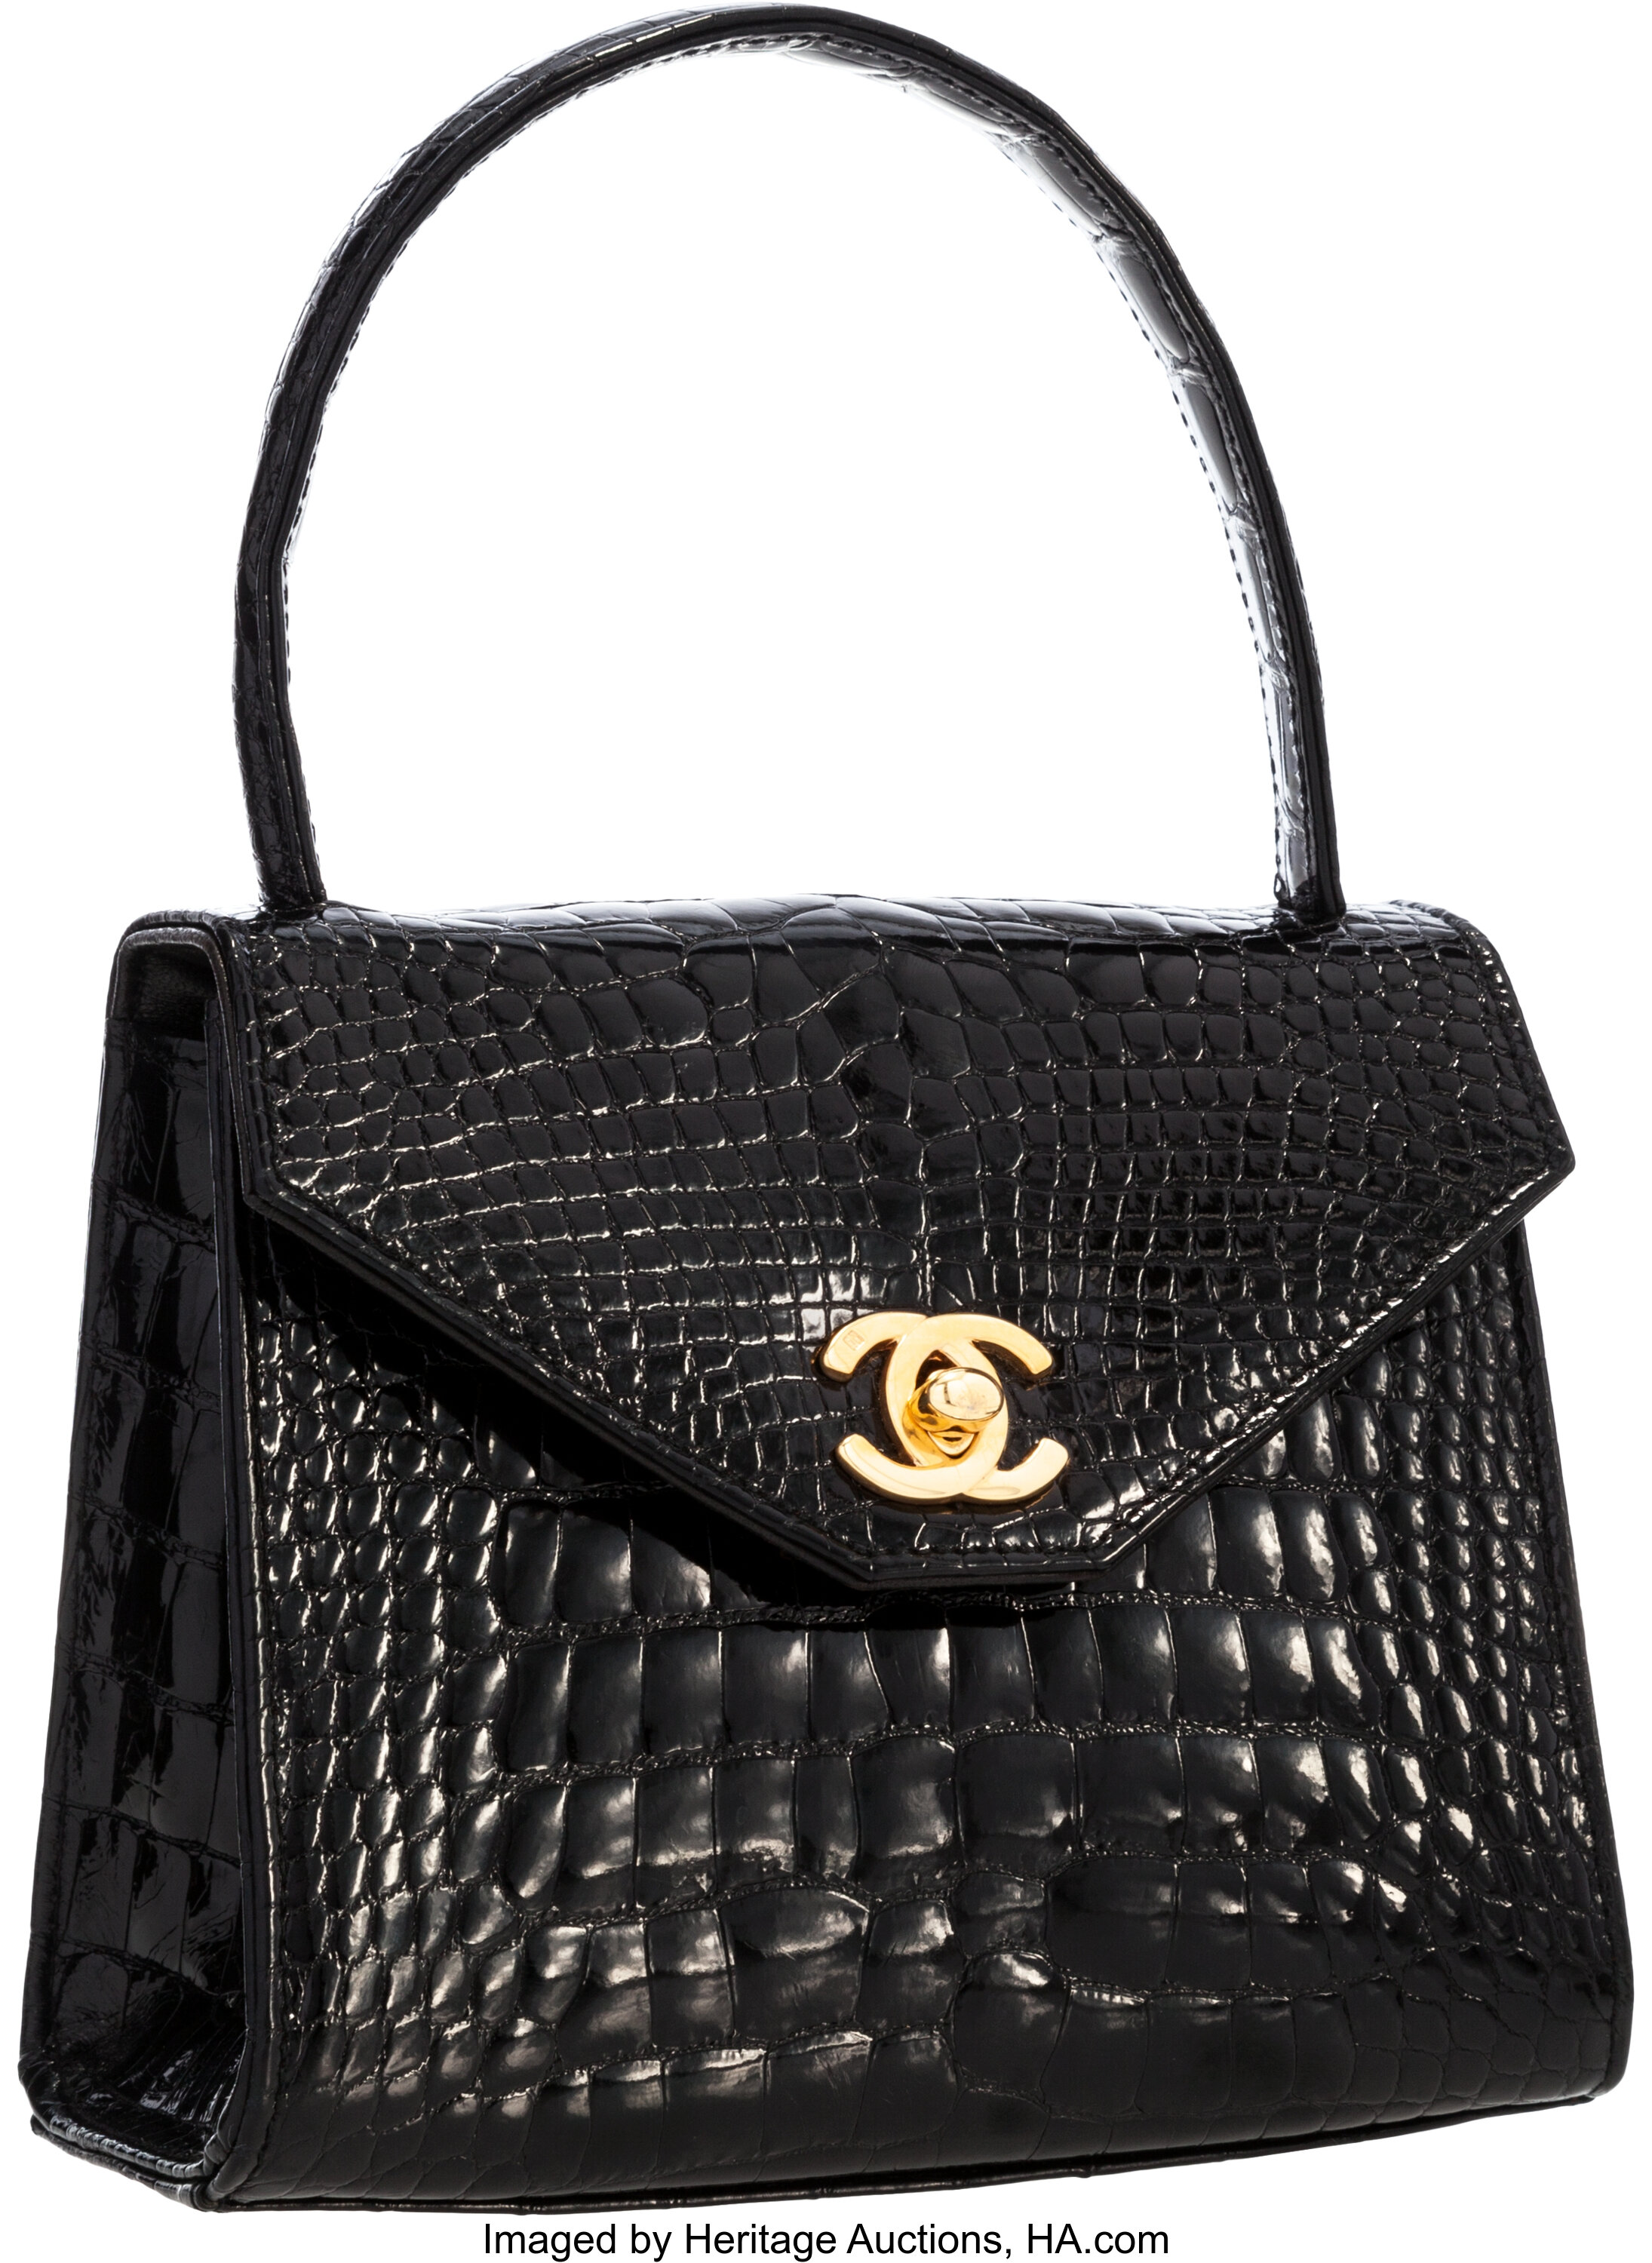 Chanel Black Crocodile Top Handle Evening Bag with Gold Hardware